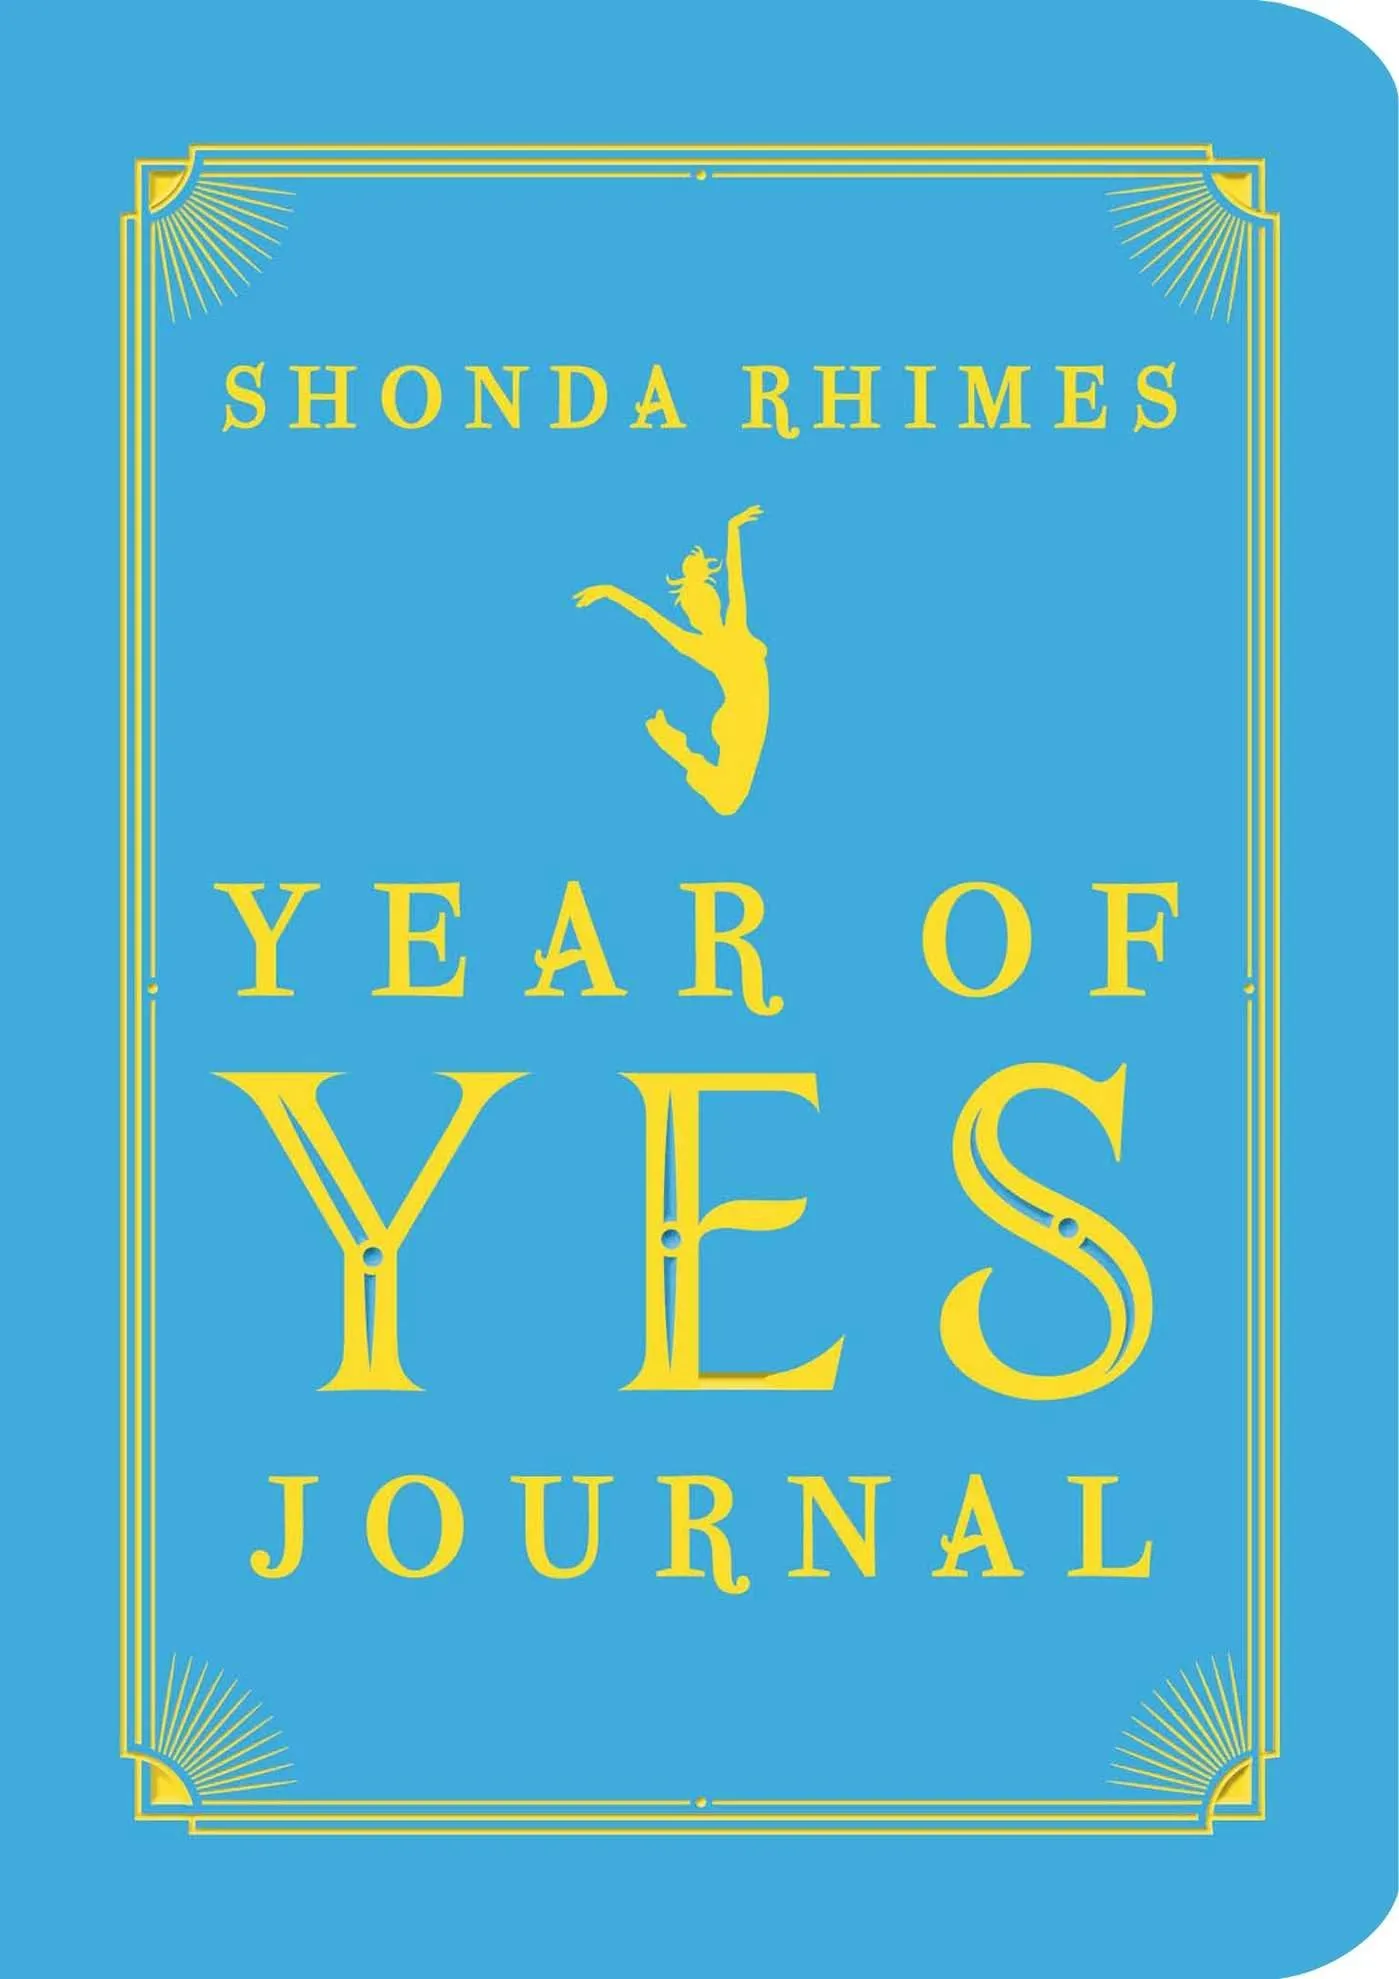 Book: The Year of Yes by Shonda Rimes